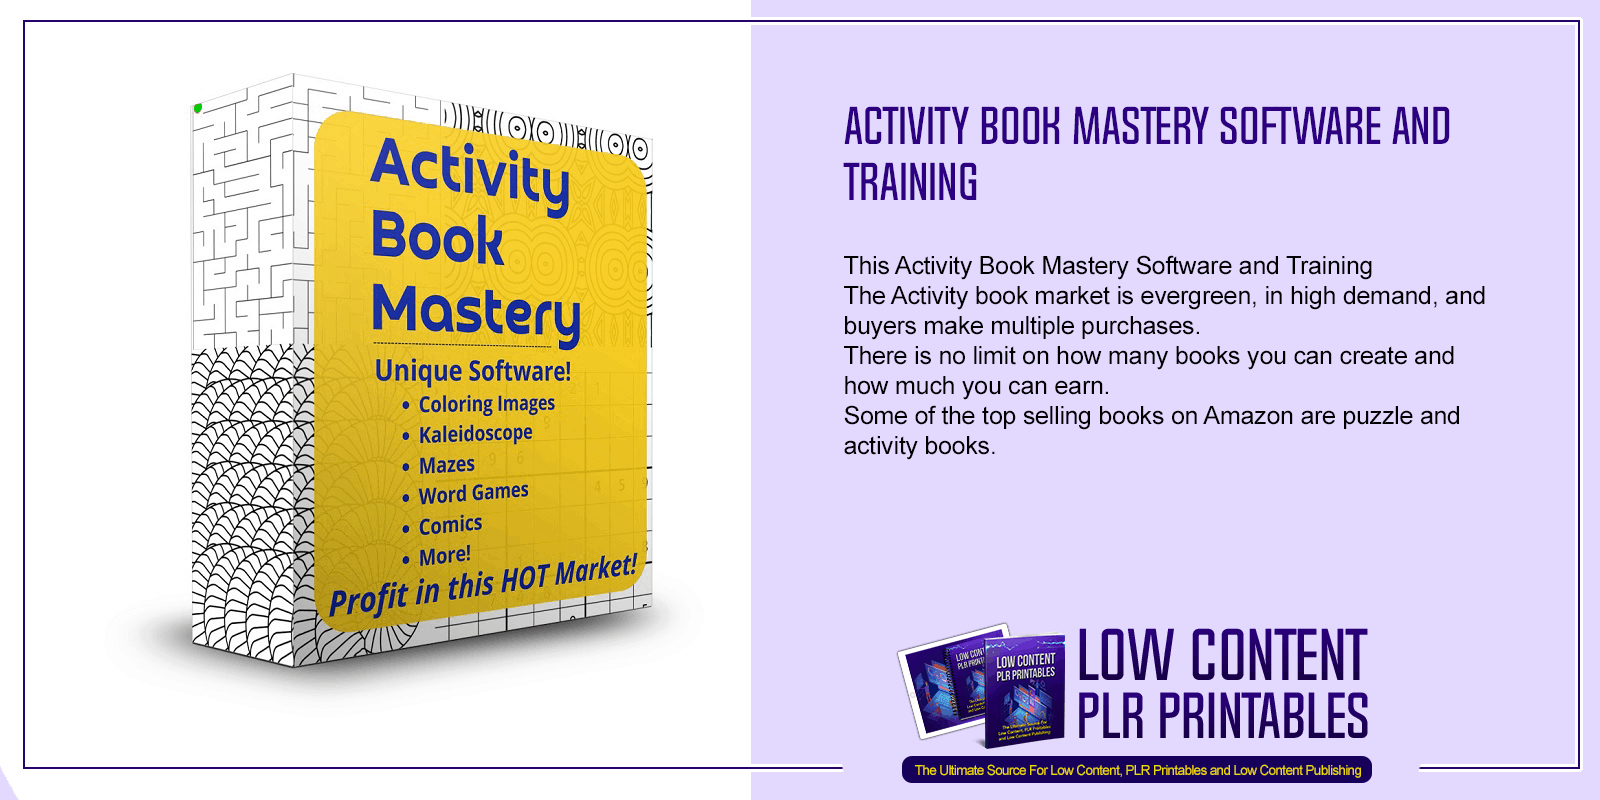 Activity Book Mastery Software and Training